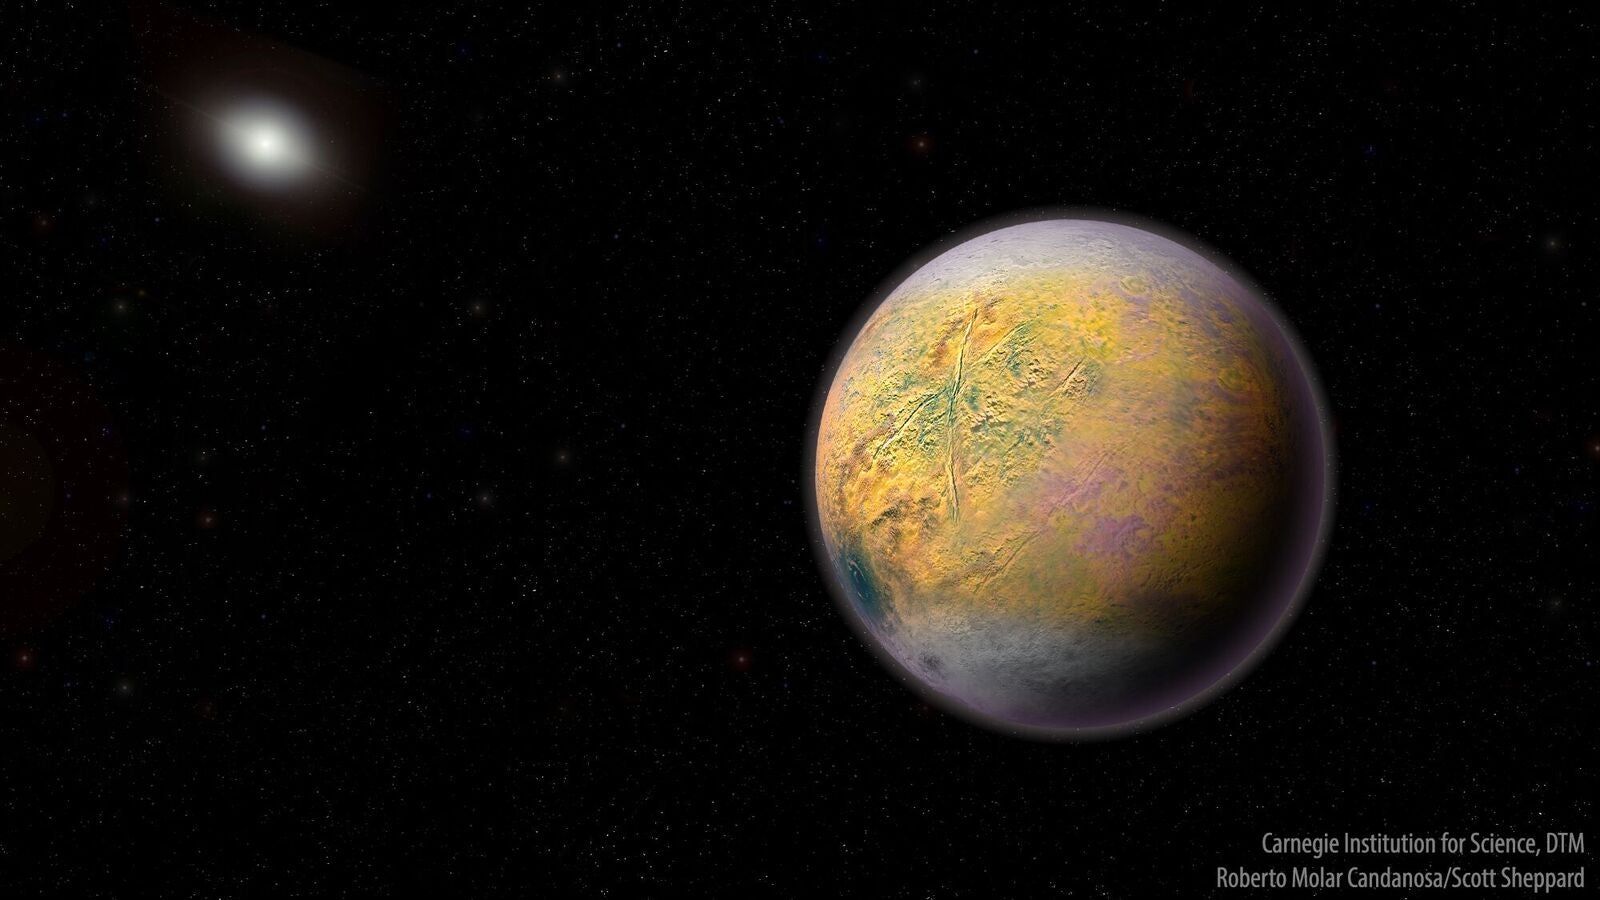 Newfound World, The Goblin, May Lead to Mysterious Planet Nine